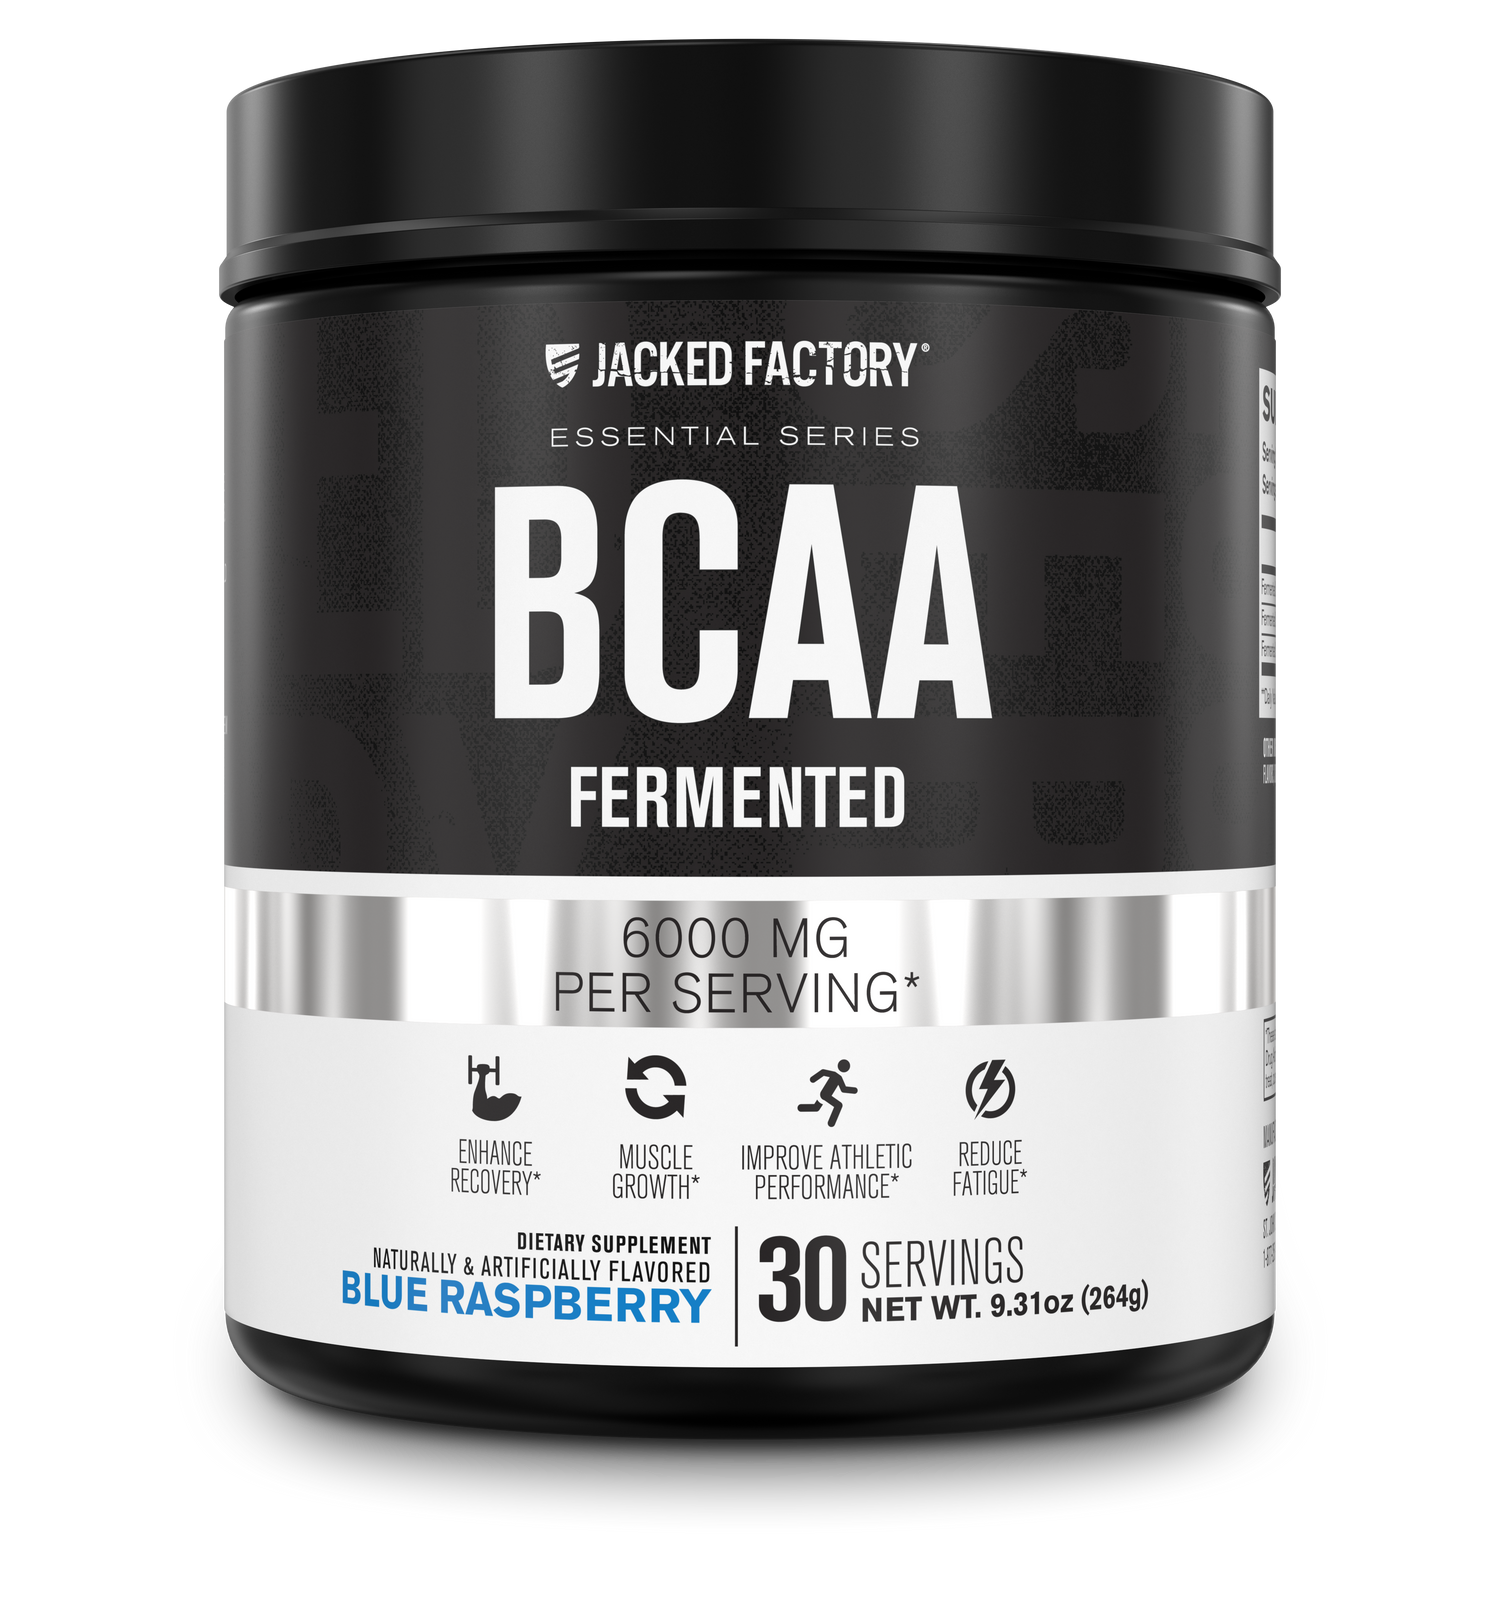 Jacked Factory's 30 servings blue raspberry BCAA Fermented 6000mg in a black bottle with a white and grey label